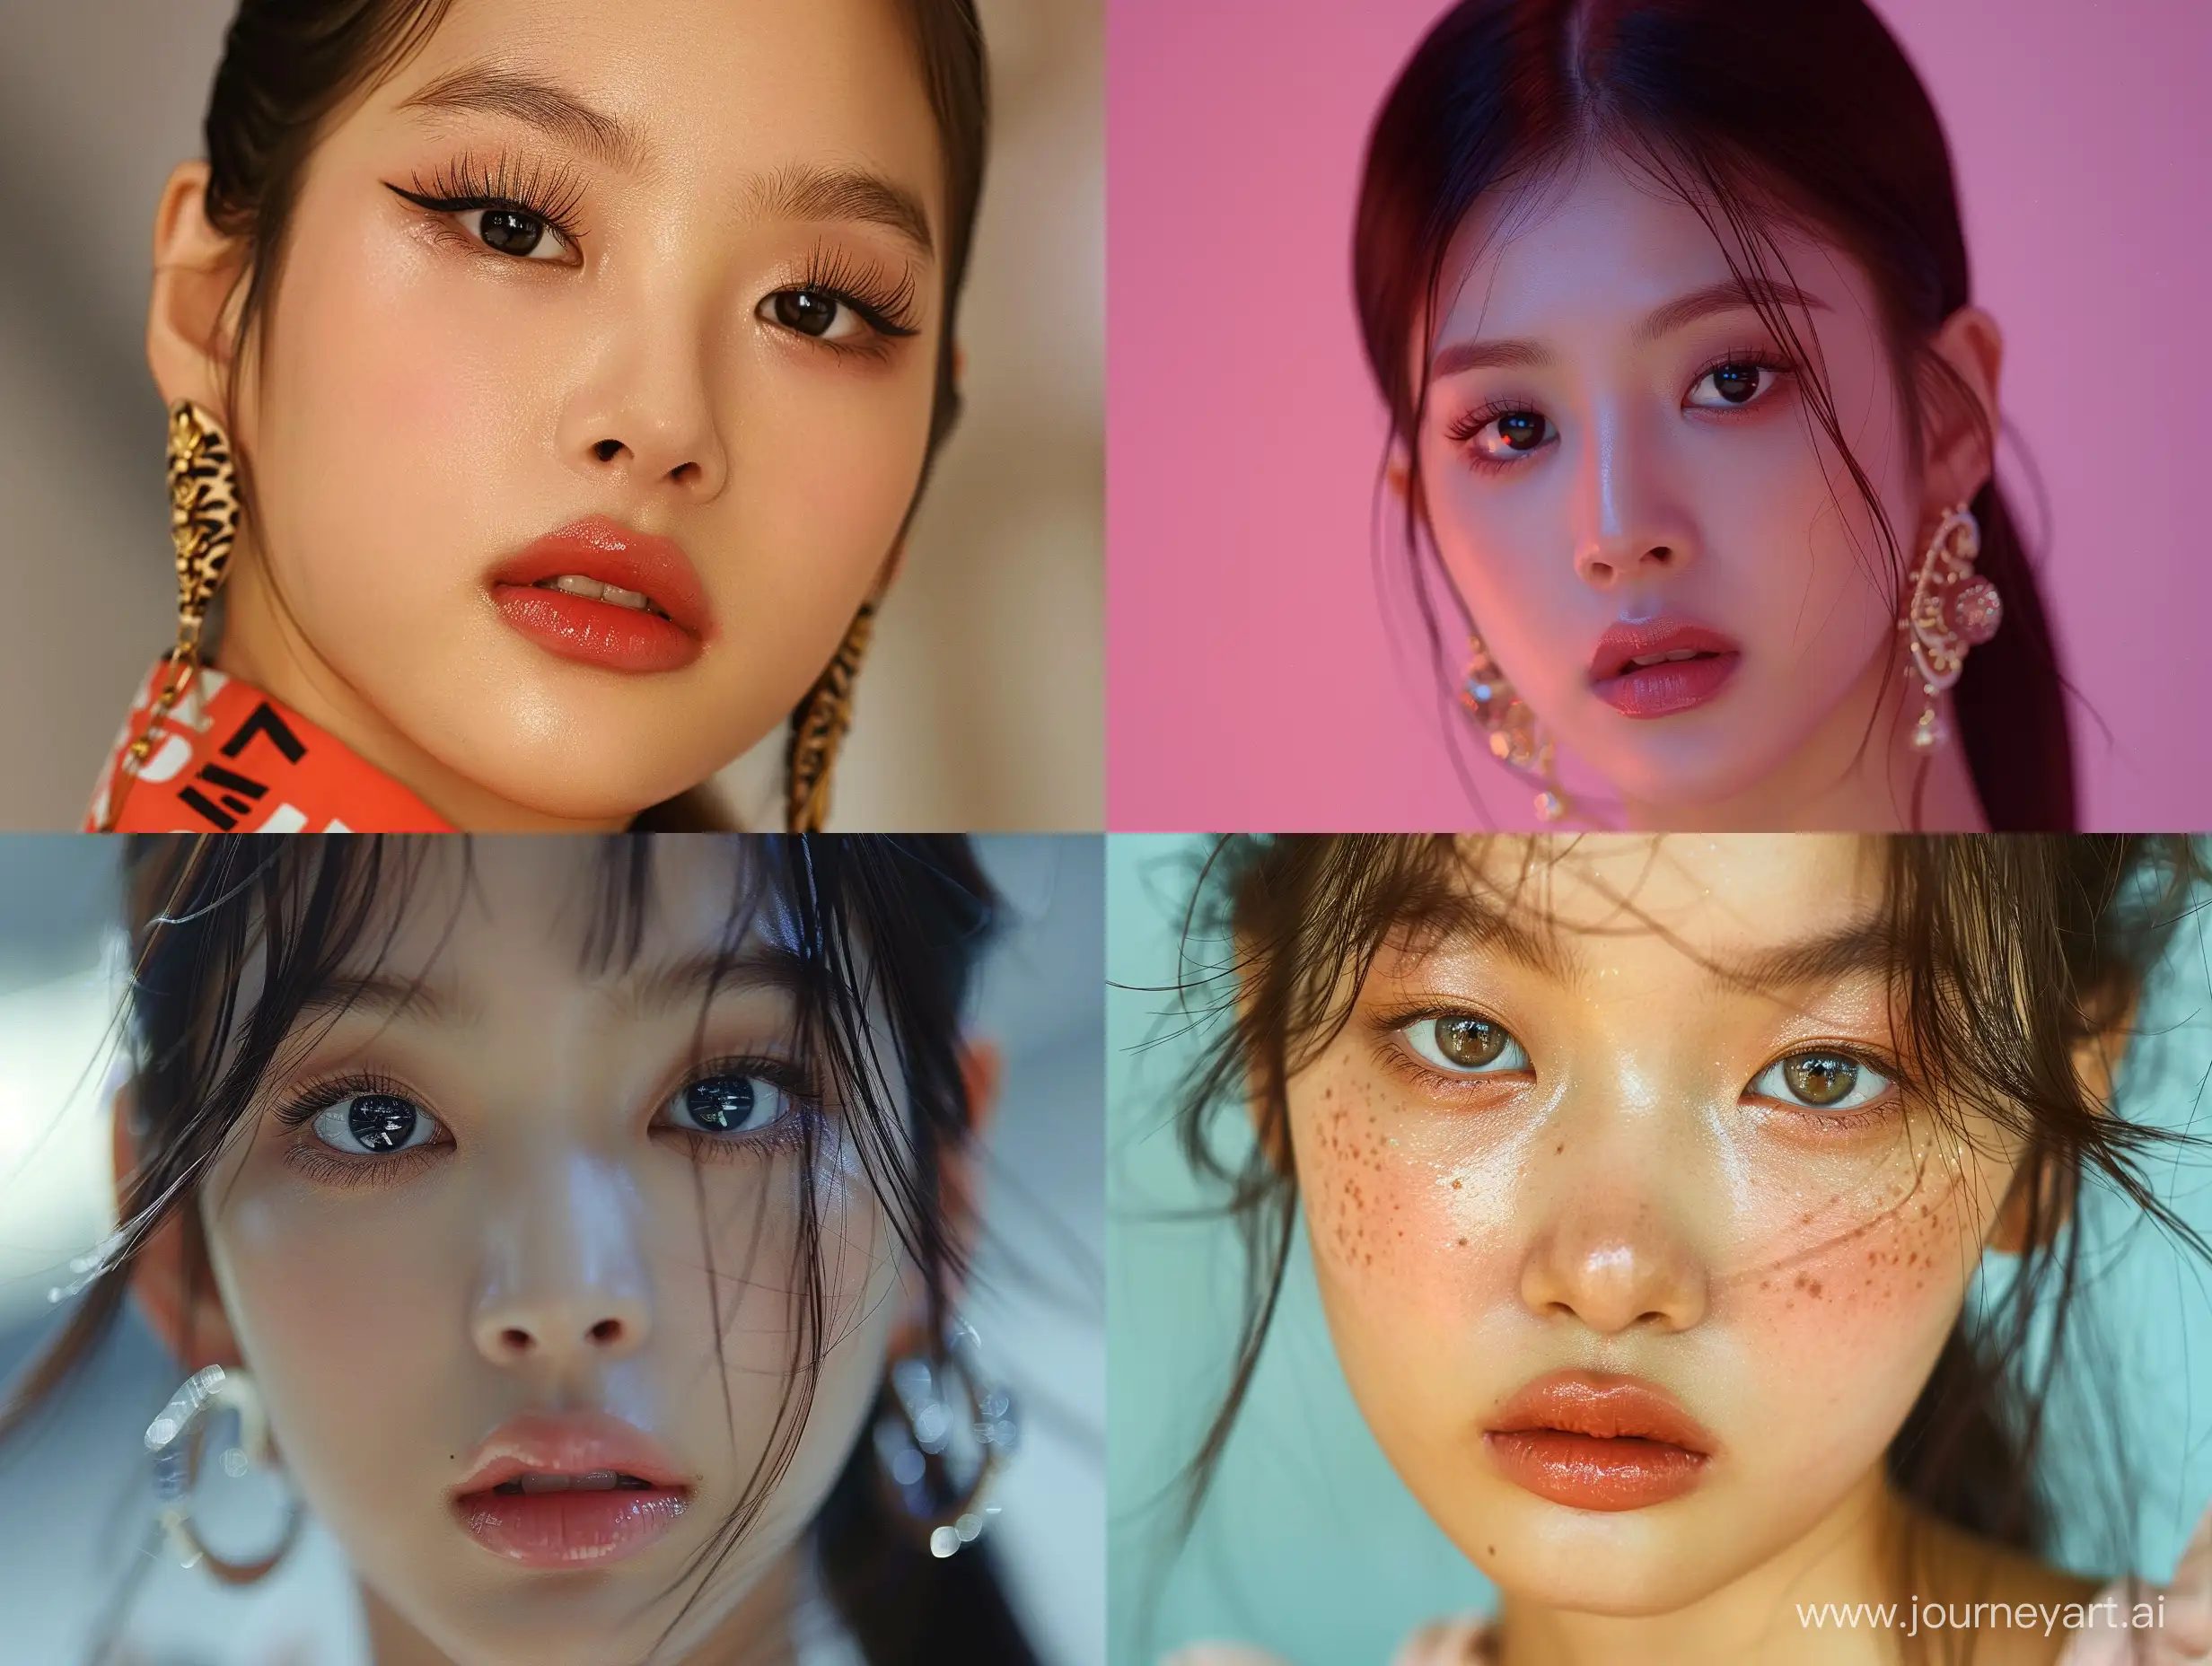 A beautiful Asian woman with wide-set eyes, a youthful appearance, and facial features resembling Blackpink's Jennie. balenciaga styles, --v 6